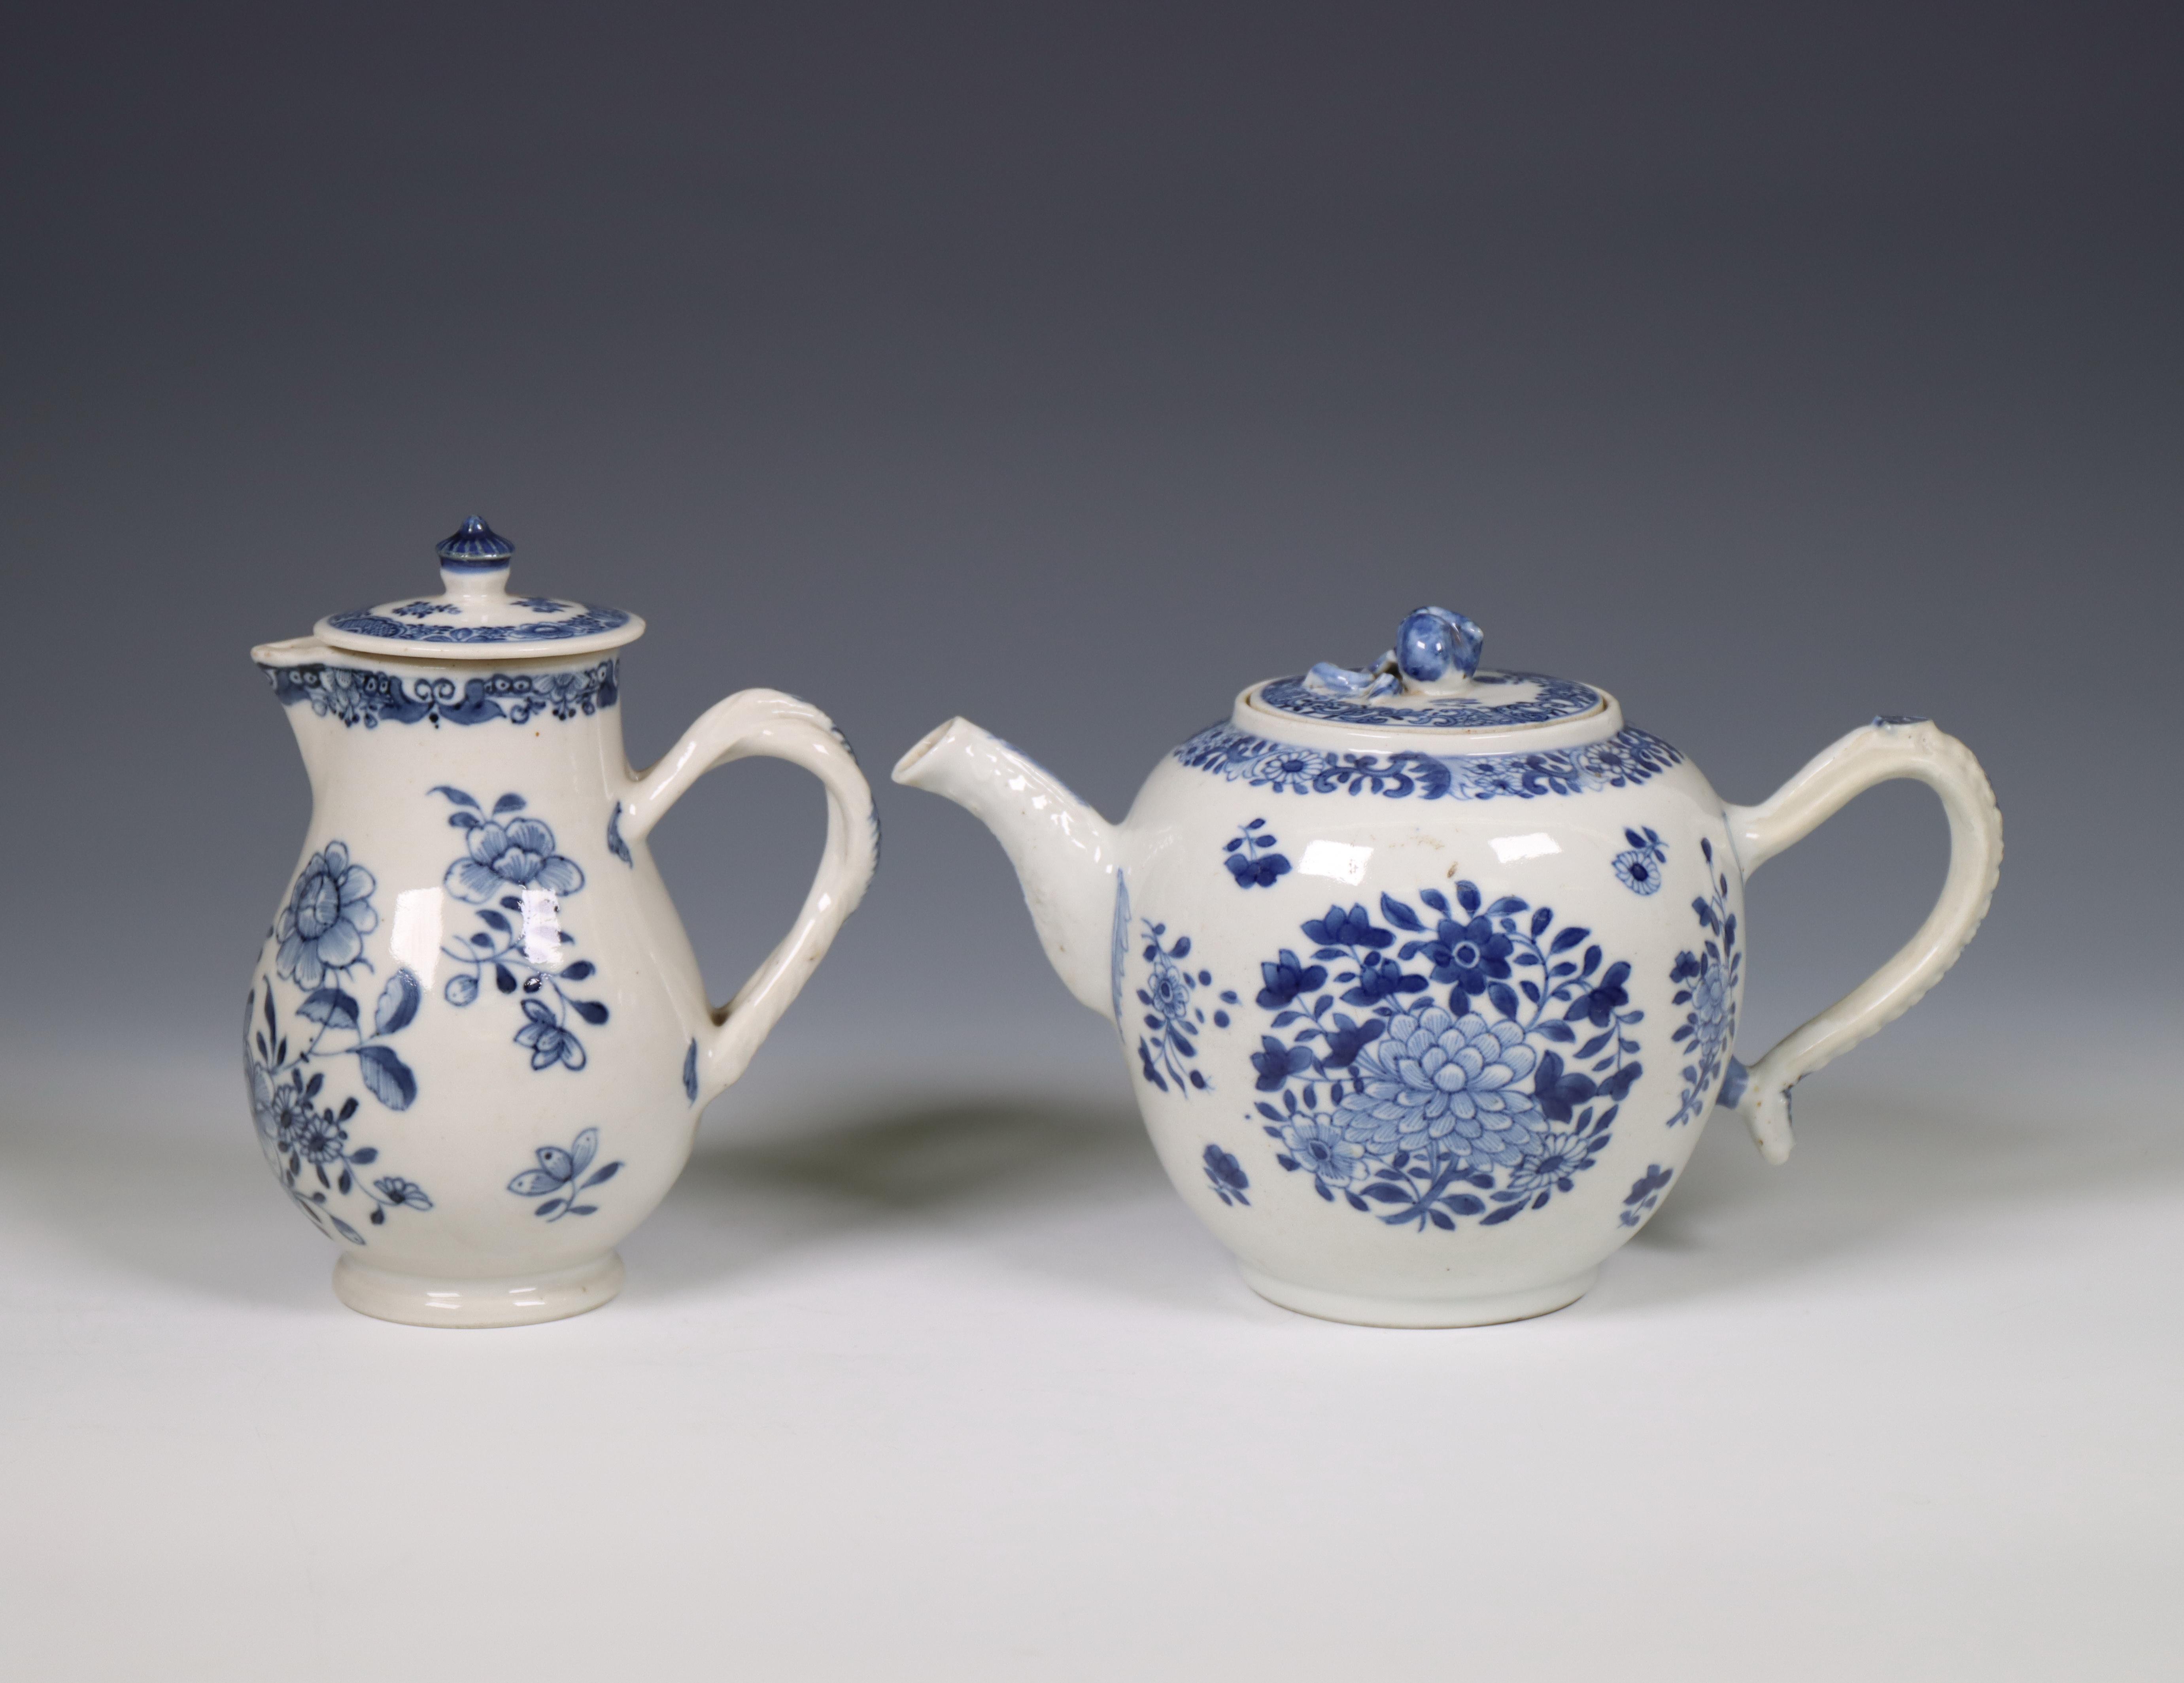 China, a blue and white porcelain teapot and a milk-jug, 18th century, - Image 4 of 6